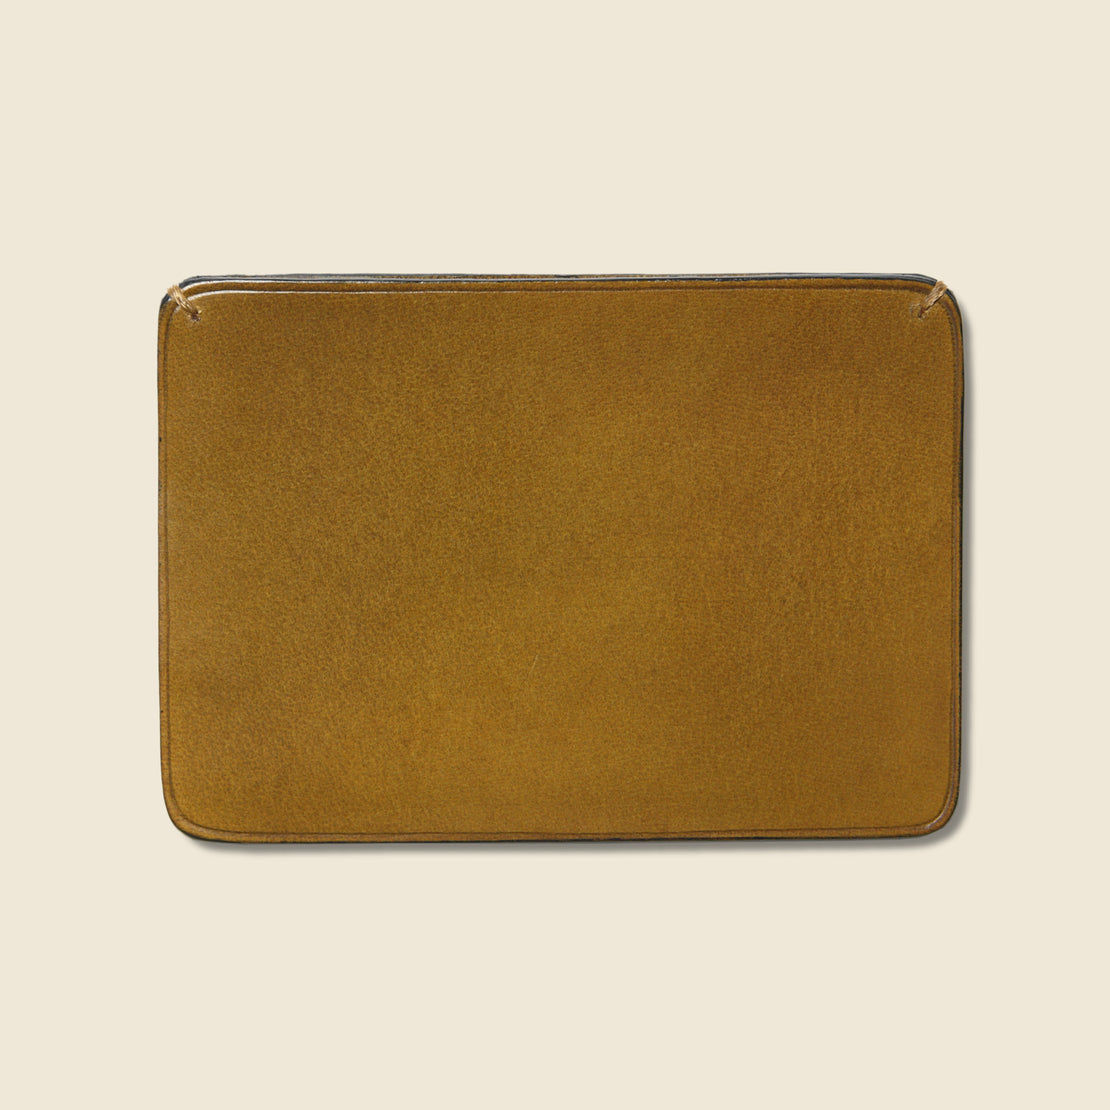 Credit Card Case - Light Brown - Il Bussetto - STAG Provisions - Accessories - Wallets